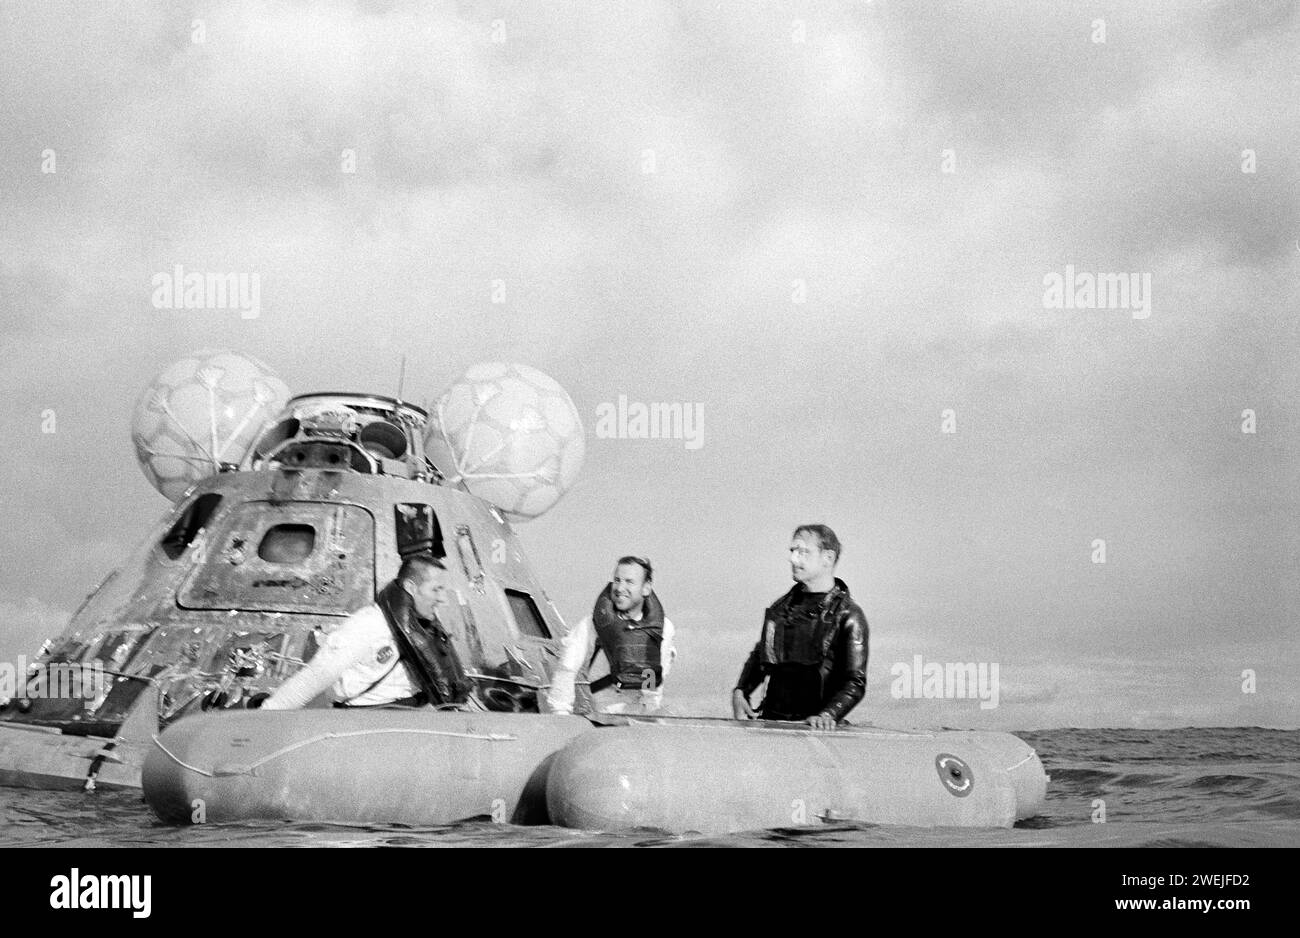 American Astronauts James A. Lovell Jr. (center), commander, and astronaut John L. Swigert Jr. (left), command module pilot, aboard watercraft during Apollo 13 recovery operations, South Pacific Ocean, NASA, April 17, 1970 Stock Photo